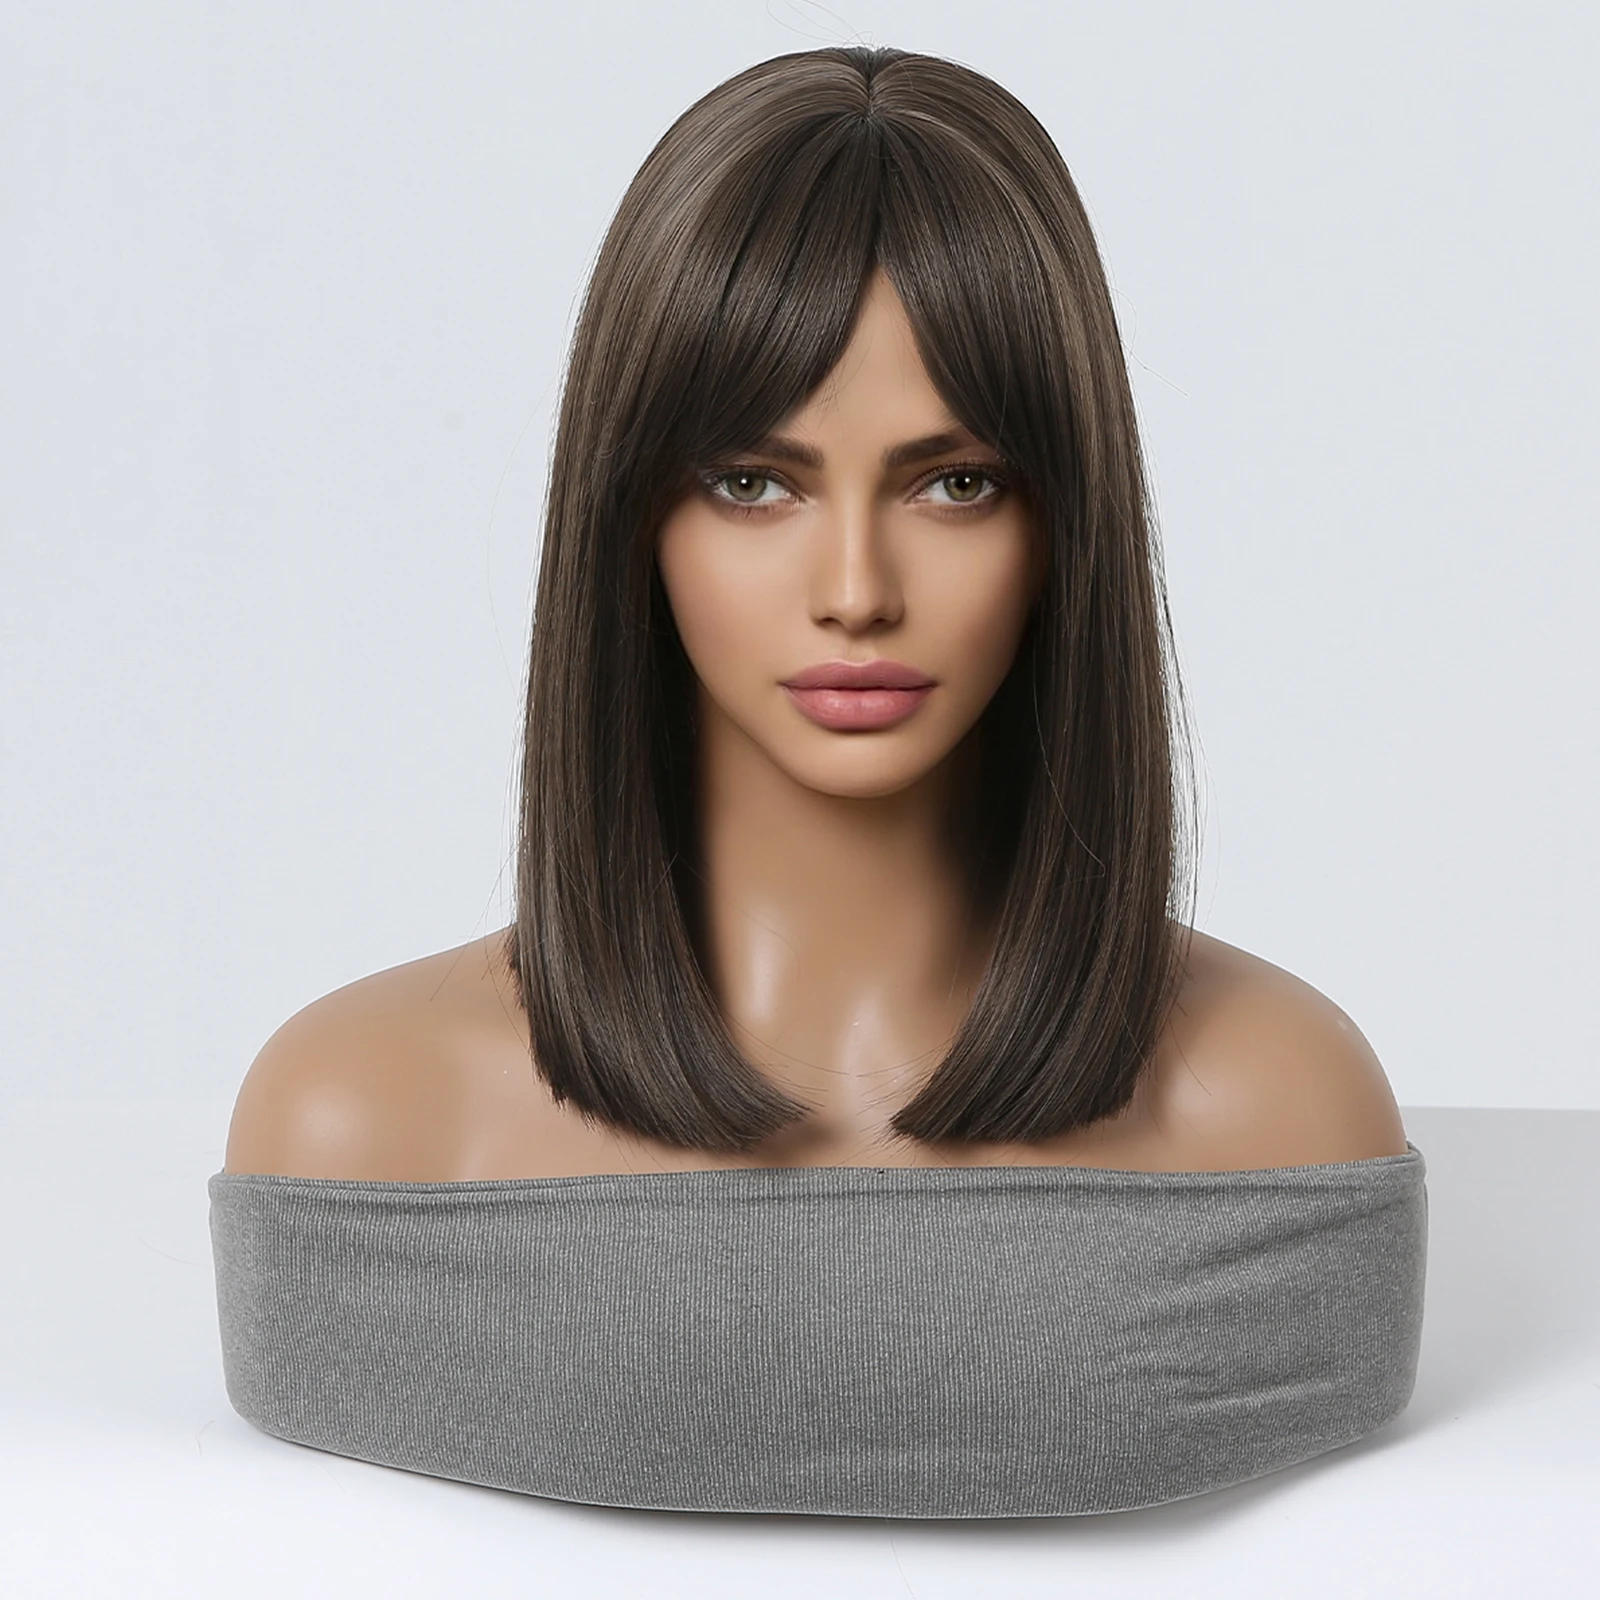 Dark Brown Straight Shoulder Length Synthetic Wigs with Side Parted Bangs for Women Daily Party Cosplay Wig Heat Resistant Fiber